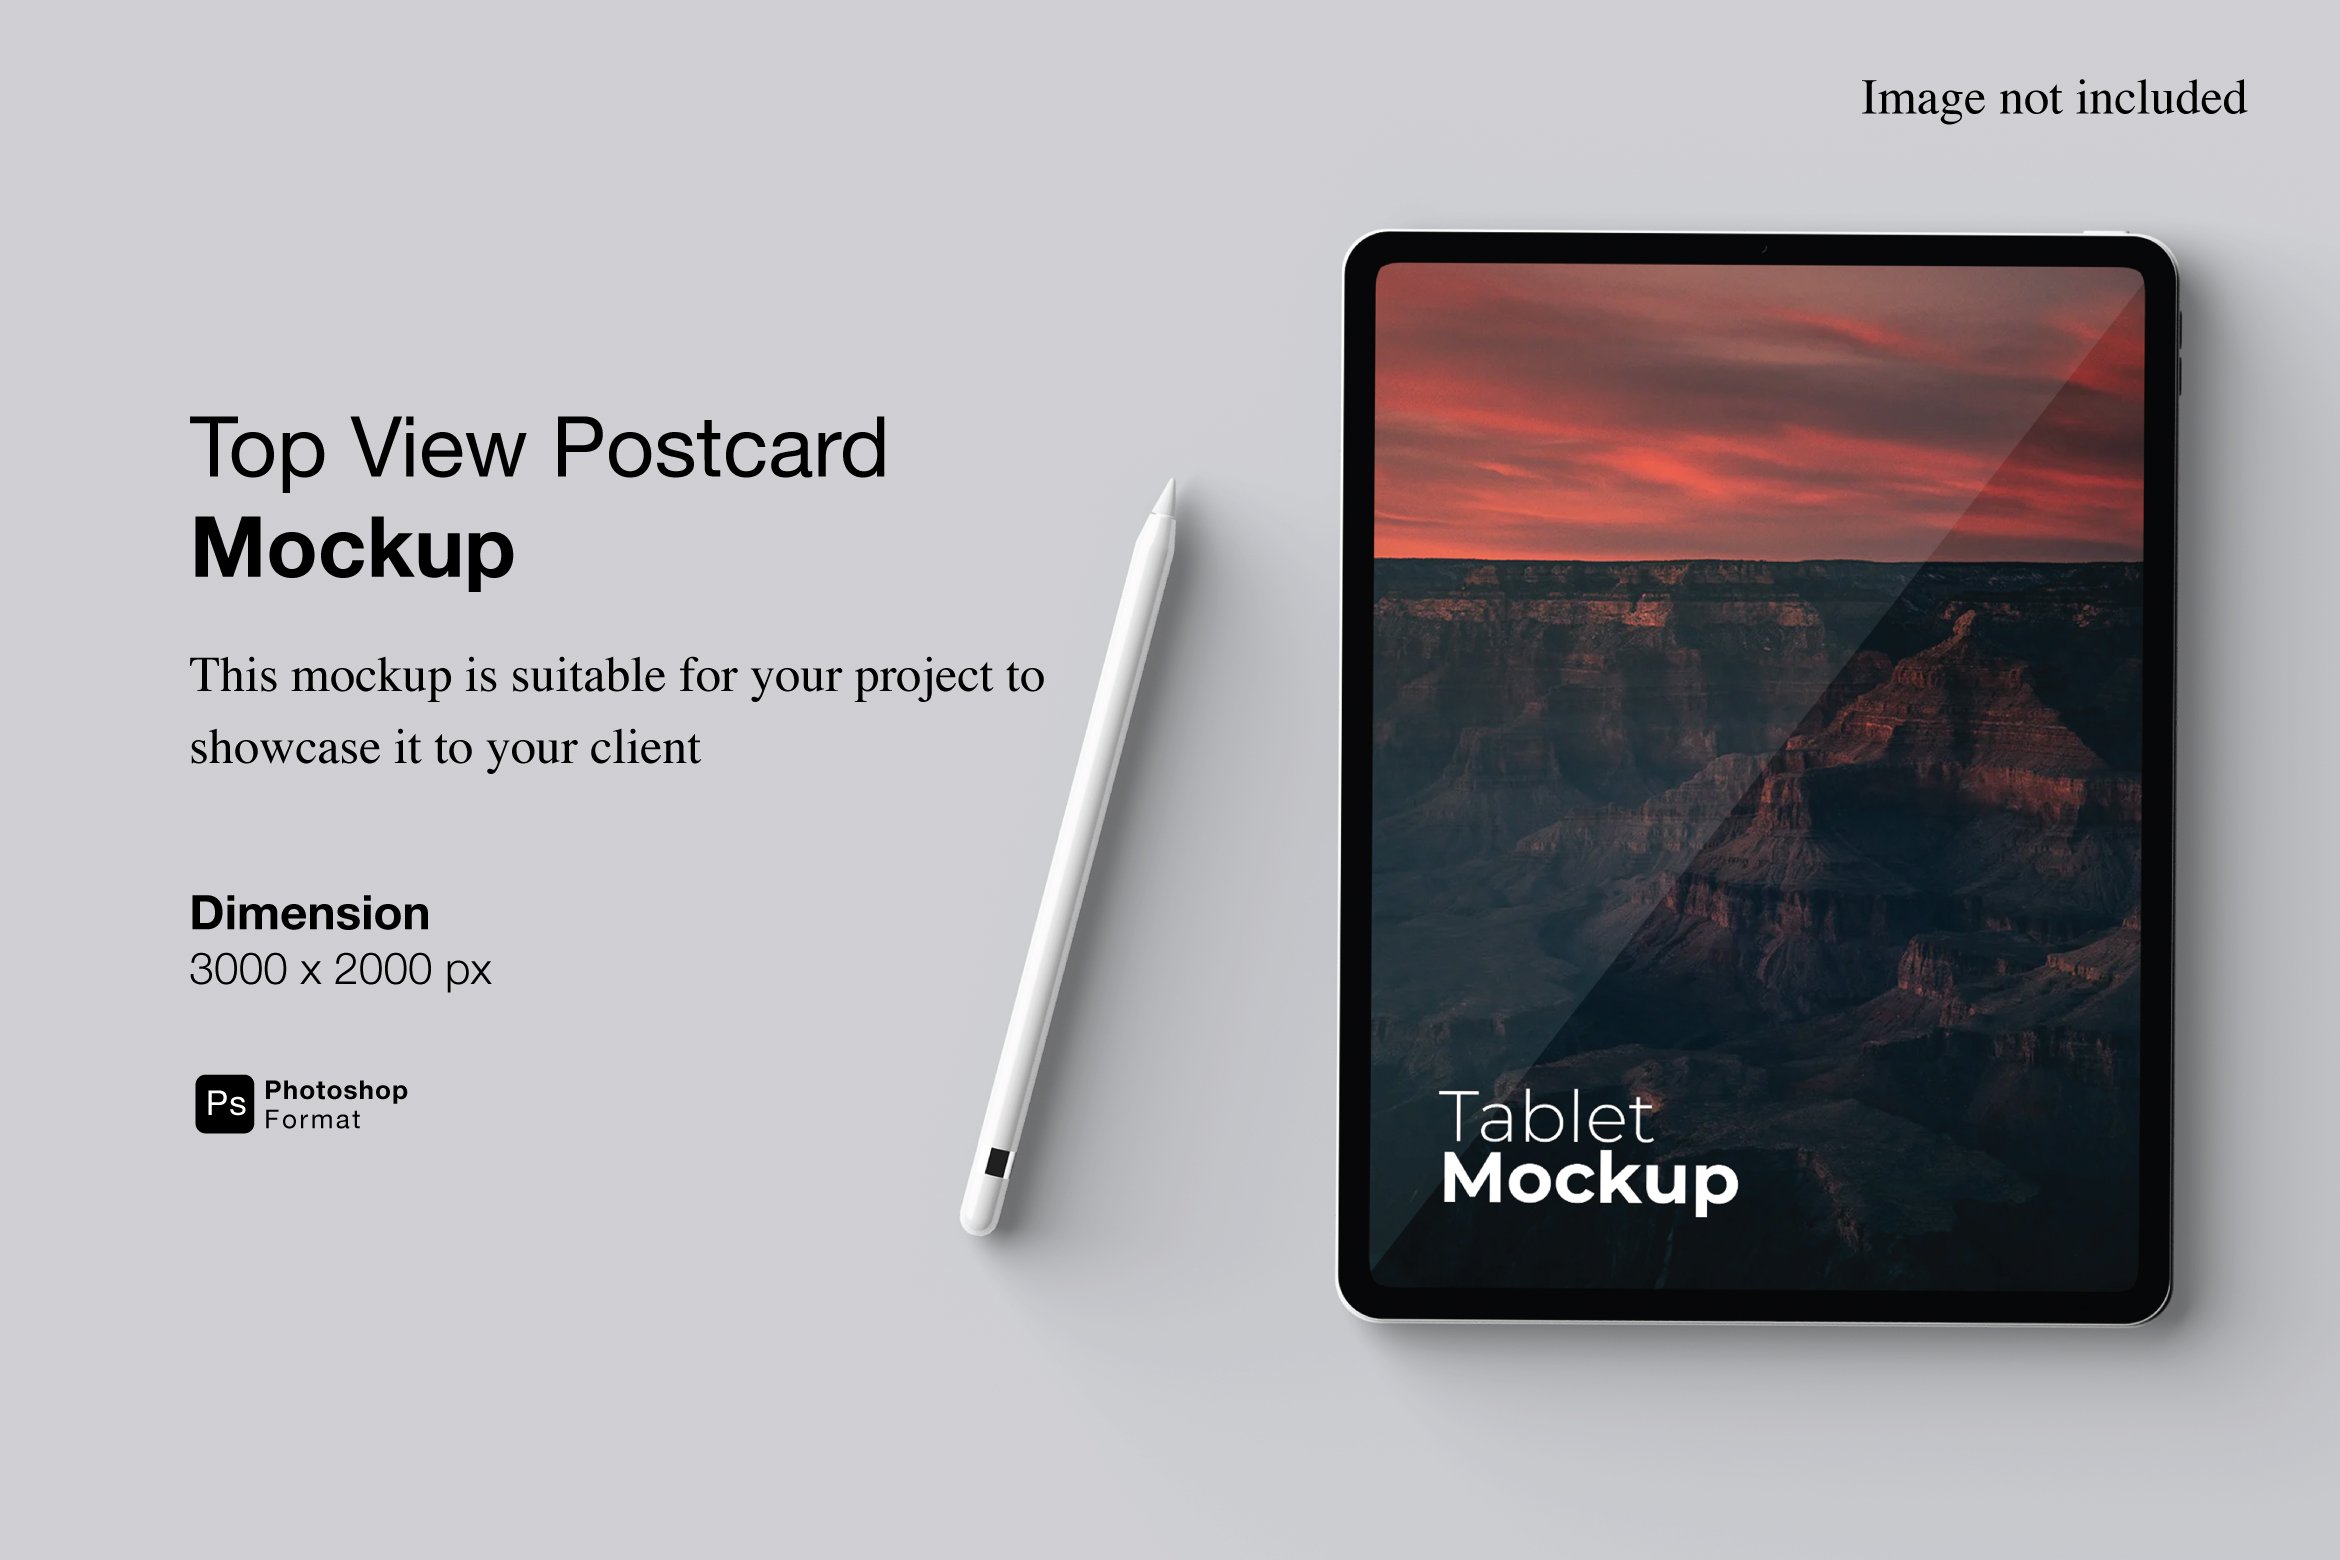 Top View Tablet Mockup cover image.